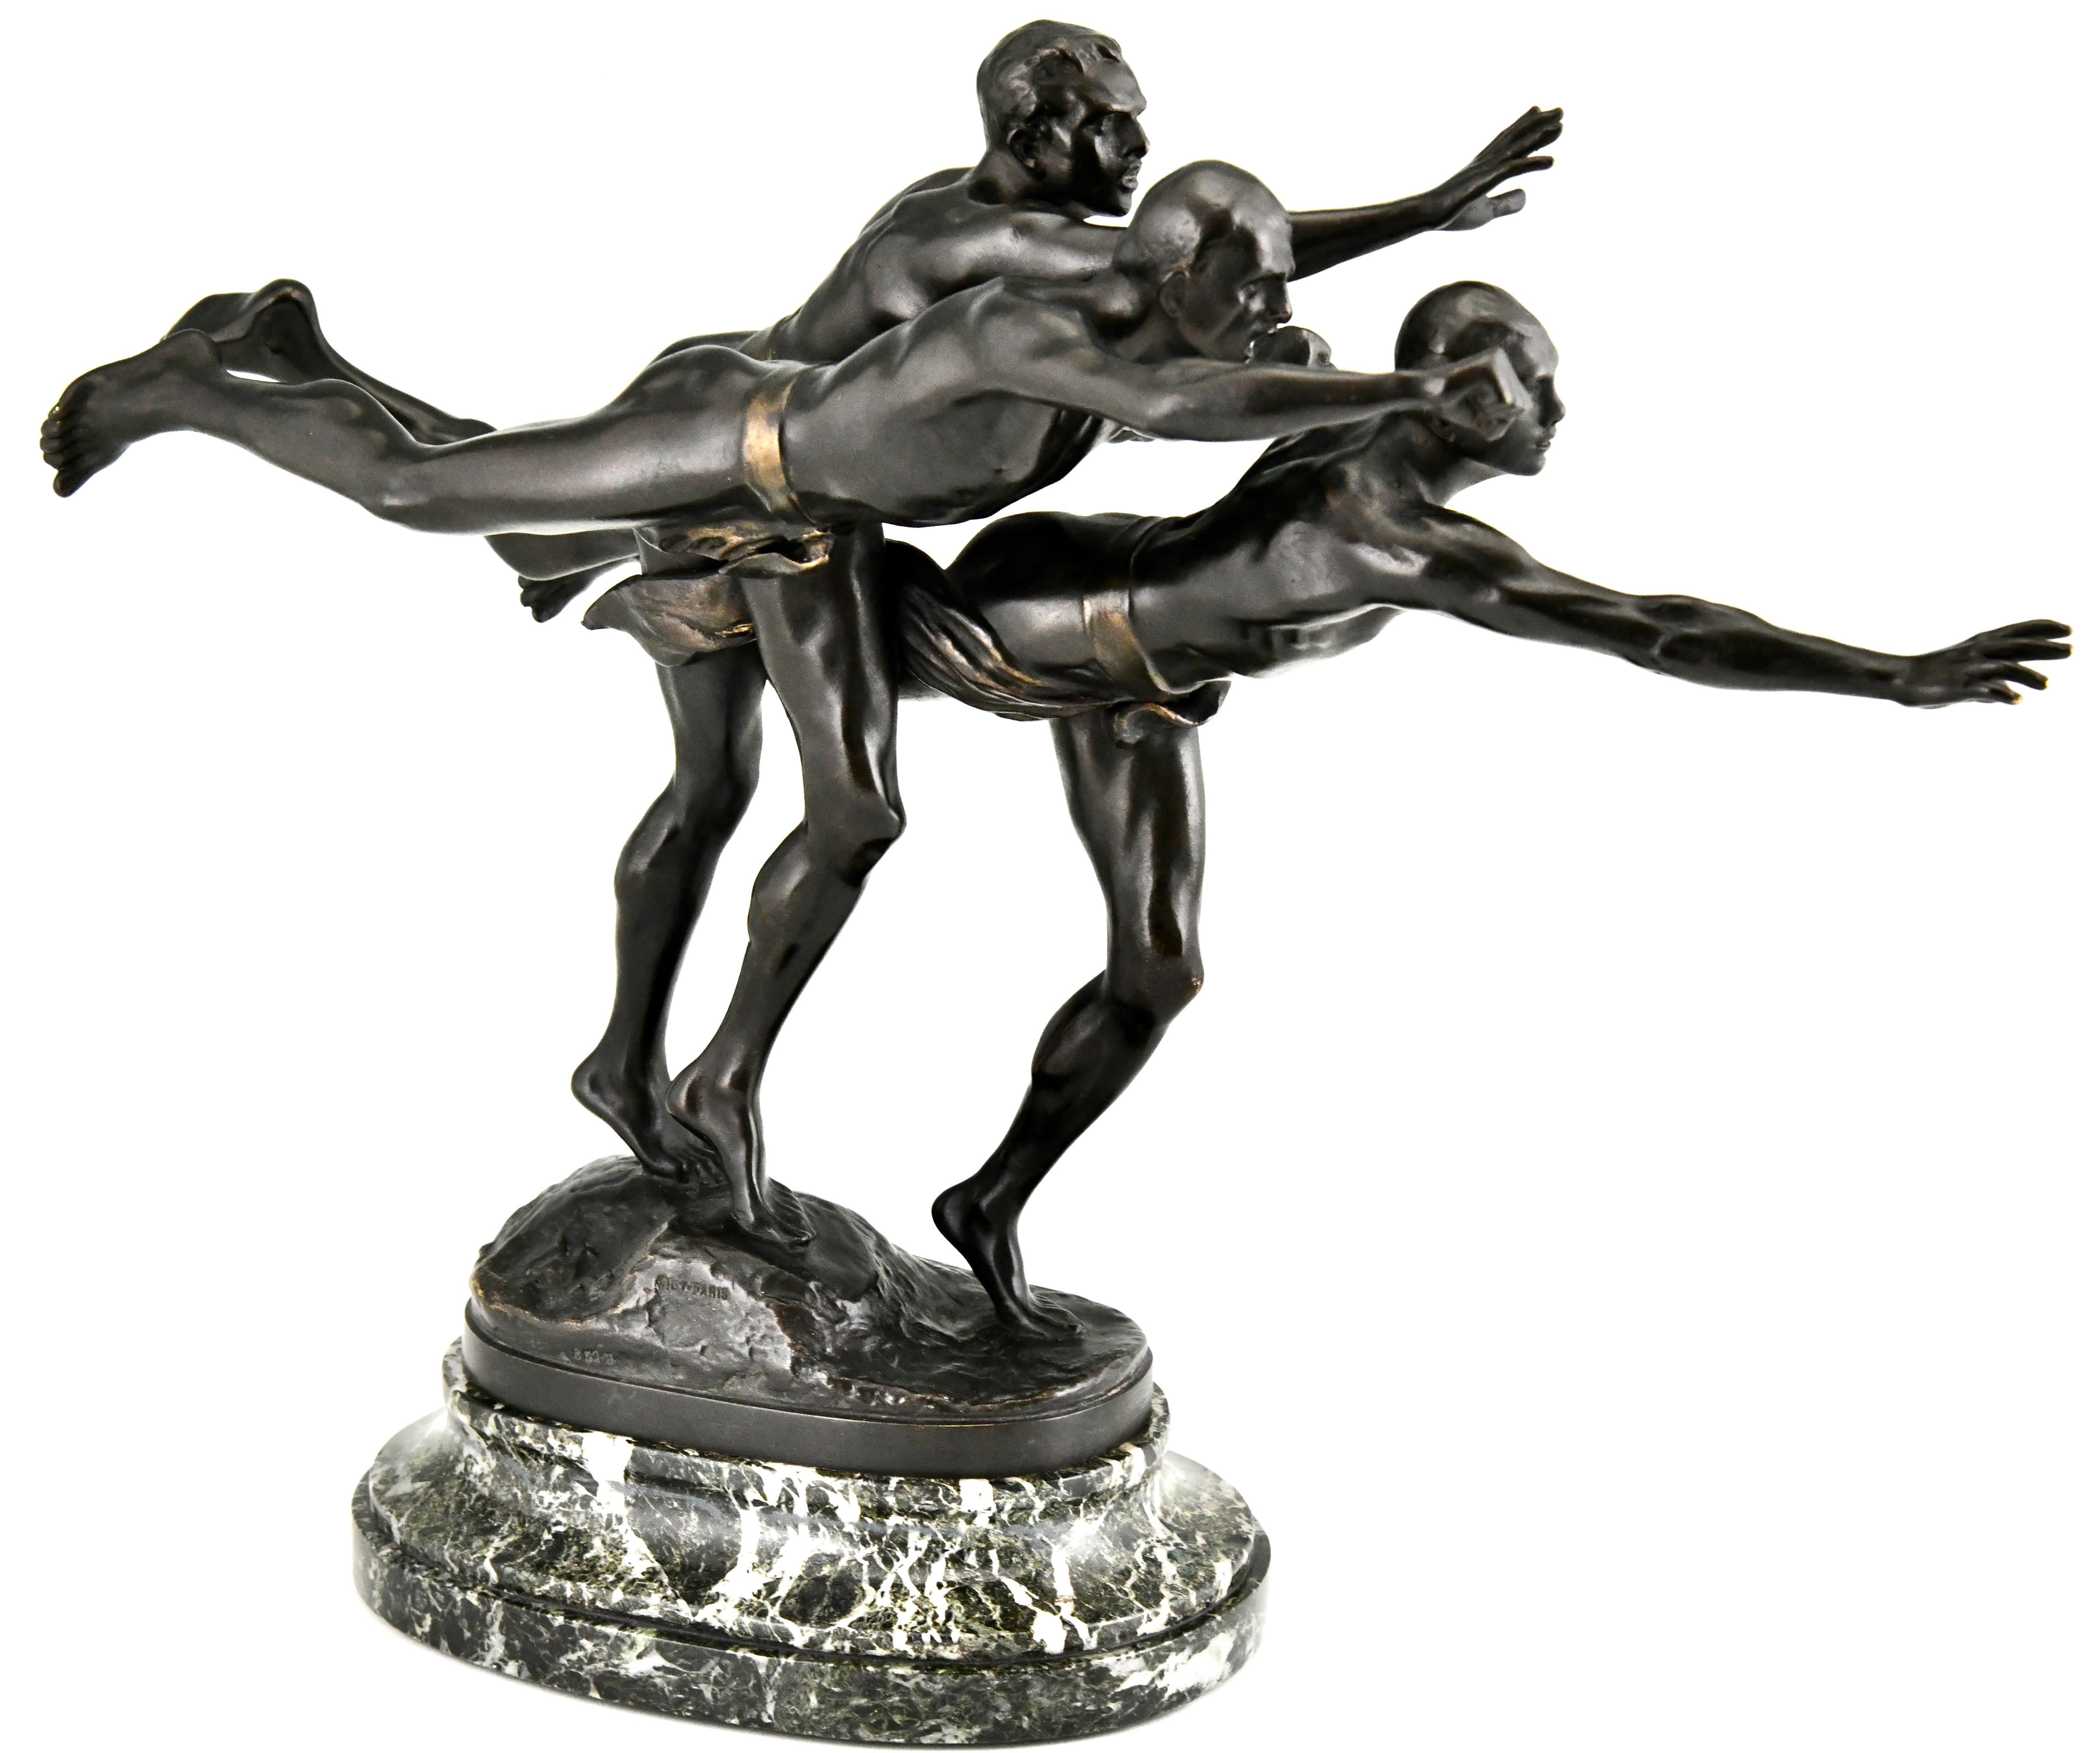 Patinated Au But, Antique Bronze Sculpture 3 Nude Runners by Alfred Boucher, France, 1890